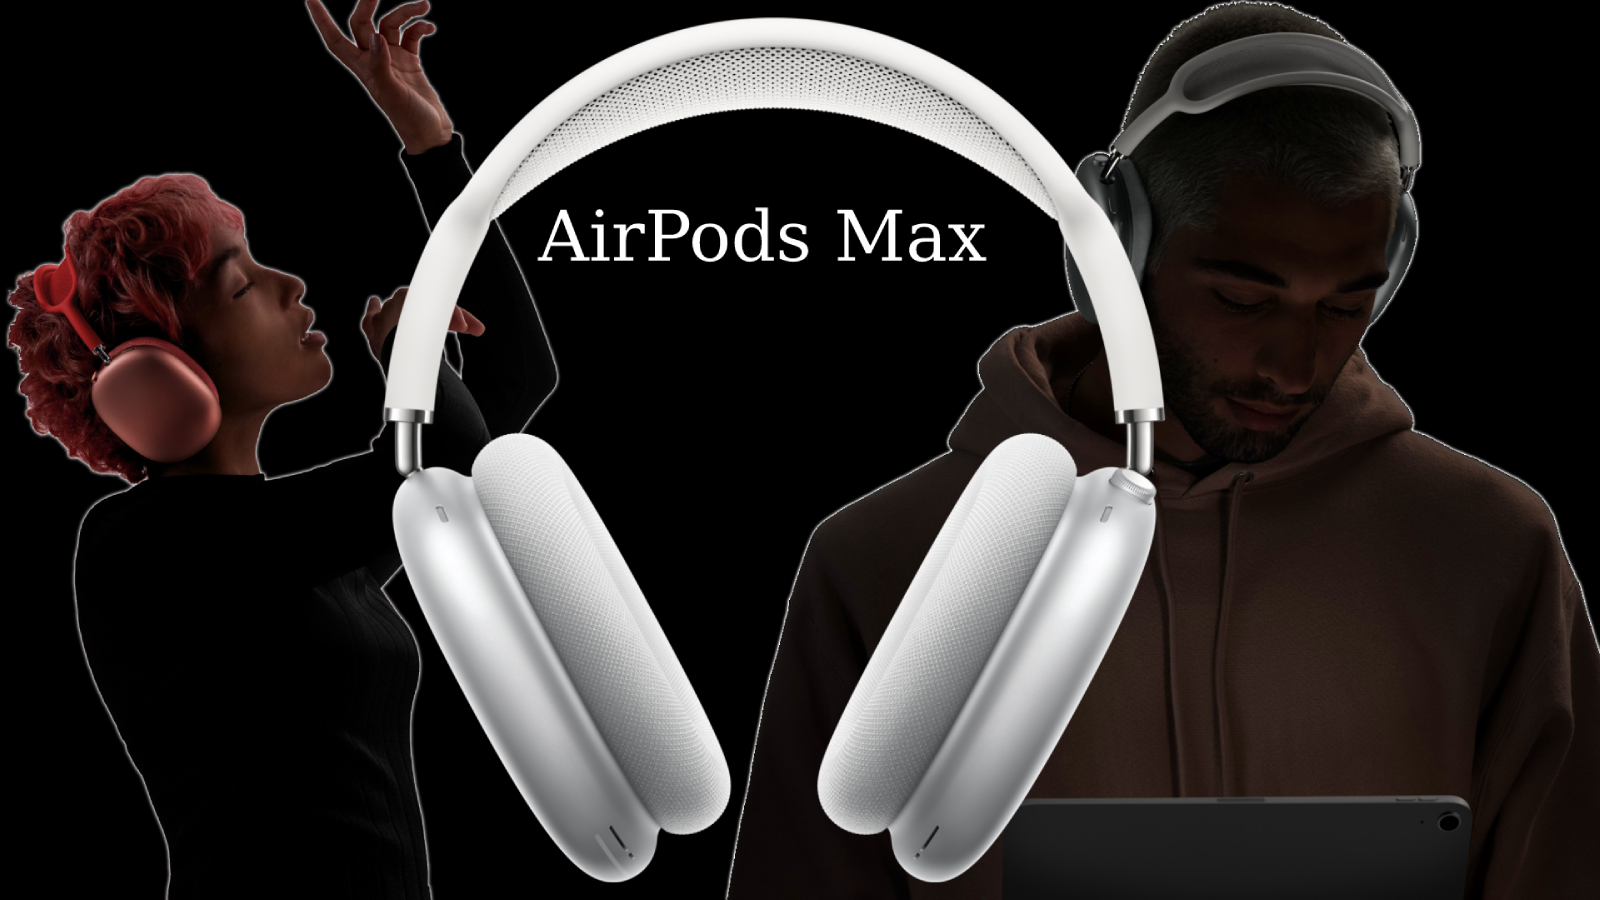 I test headphones for a living and this AirPods Max feature blew